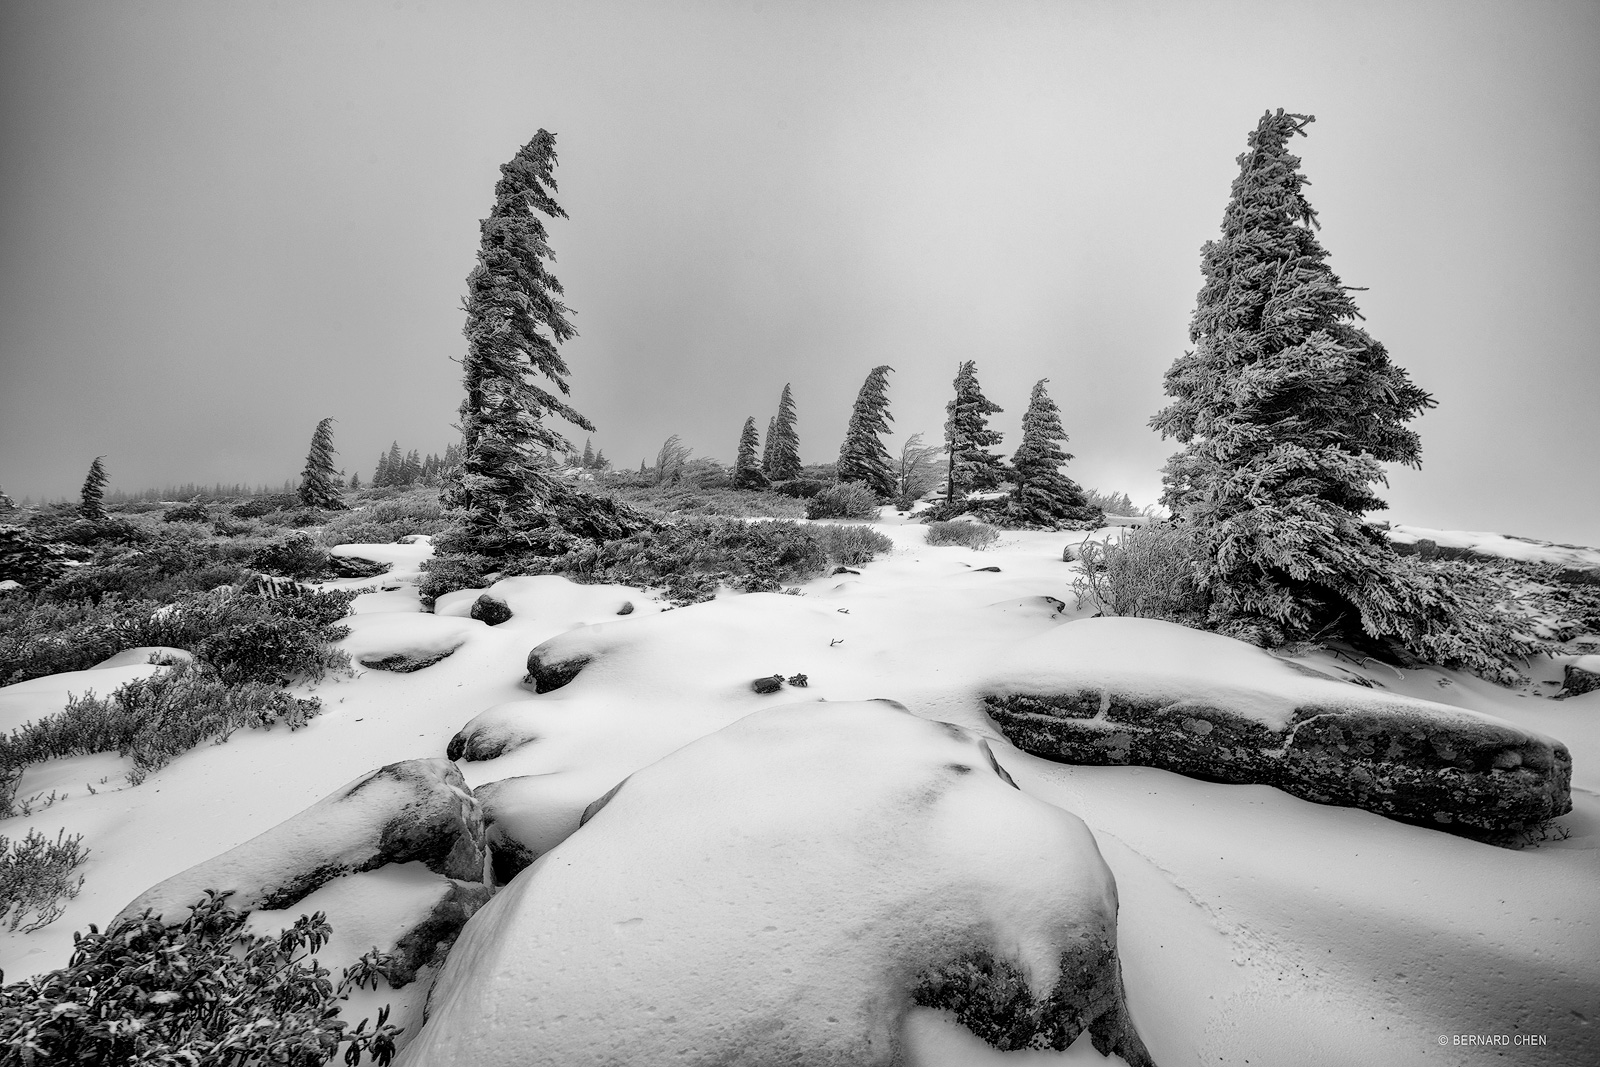 The unforgiving winter conditions on Dolly Sods makes this shot almost impossible and on this day, the winds was howling around...